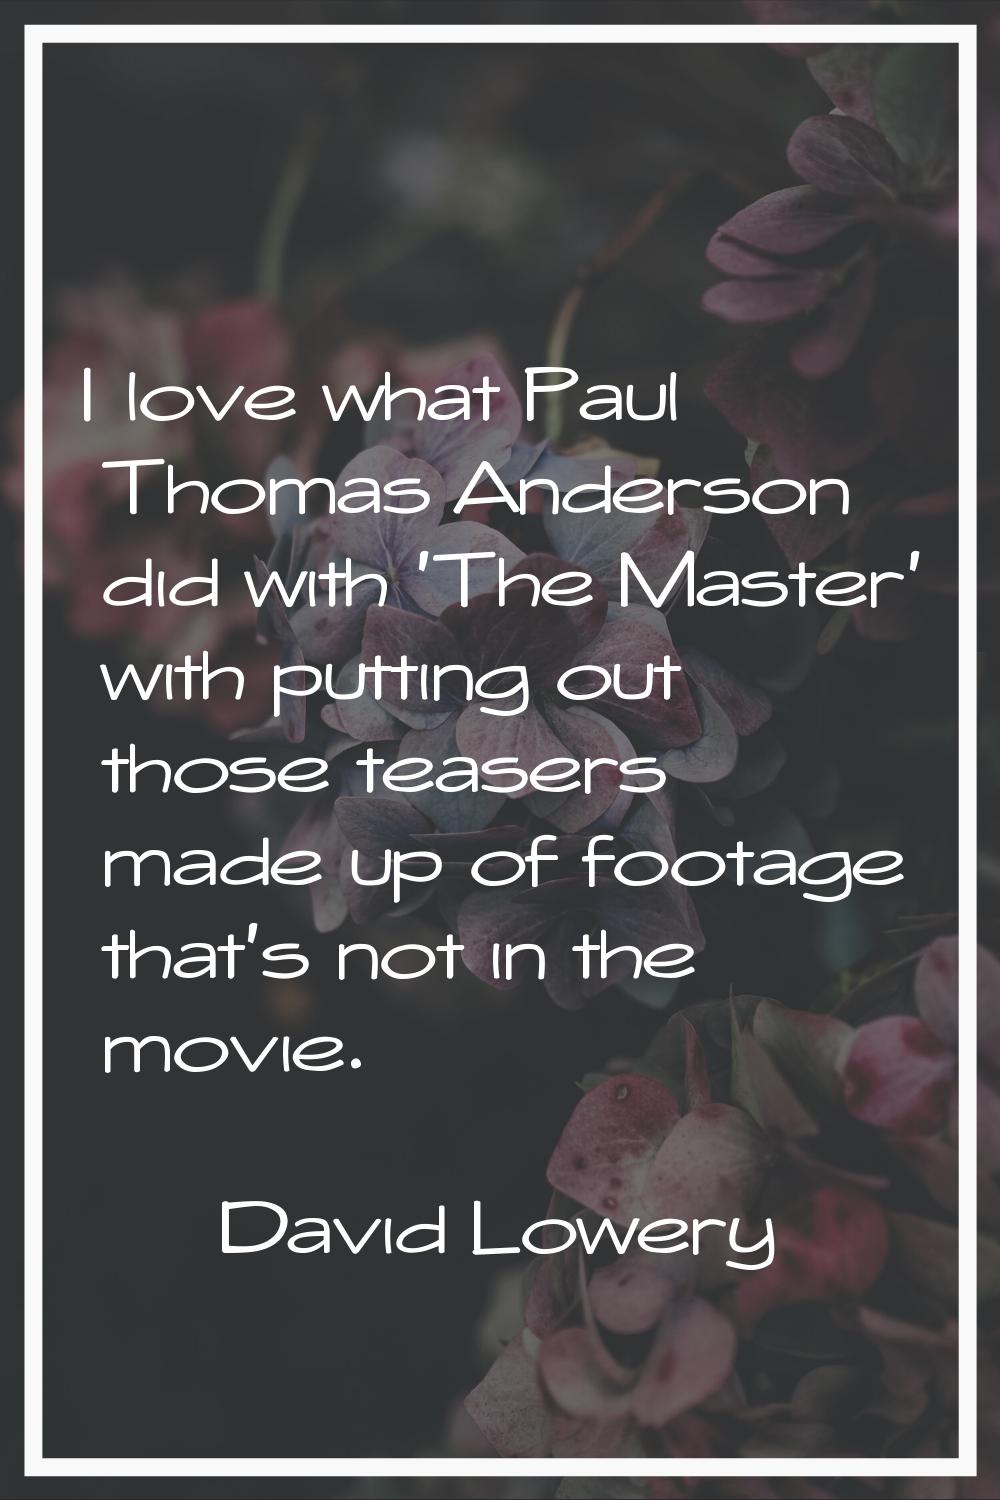 I love what Paul Thomas Anderson did with 'The Master' with putting out those teasers made up of fo